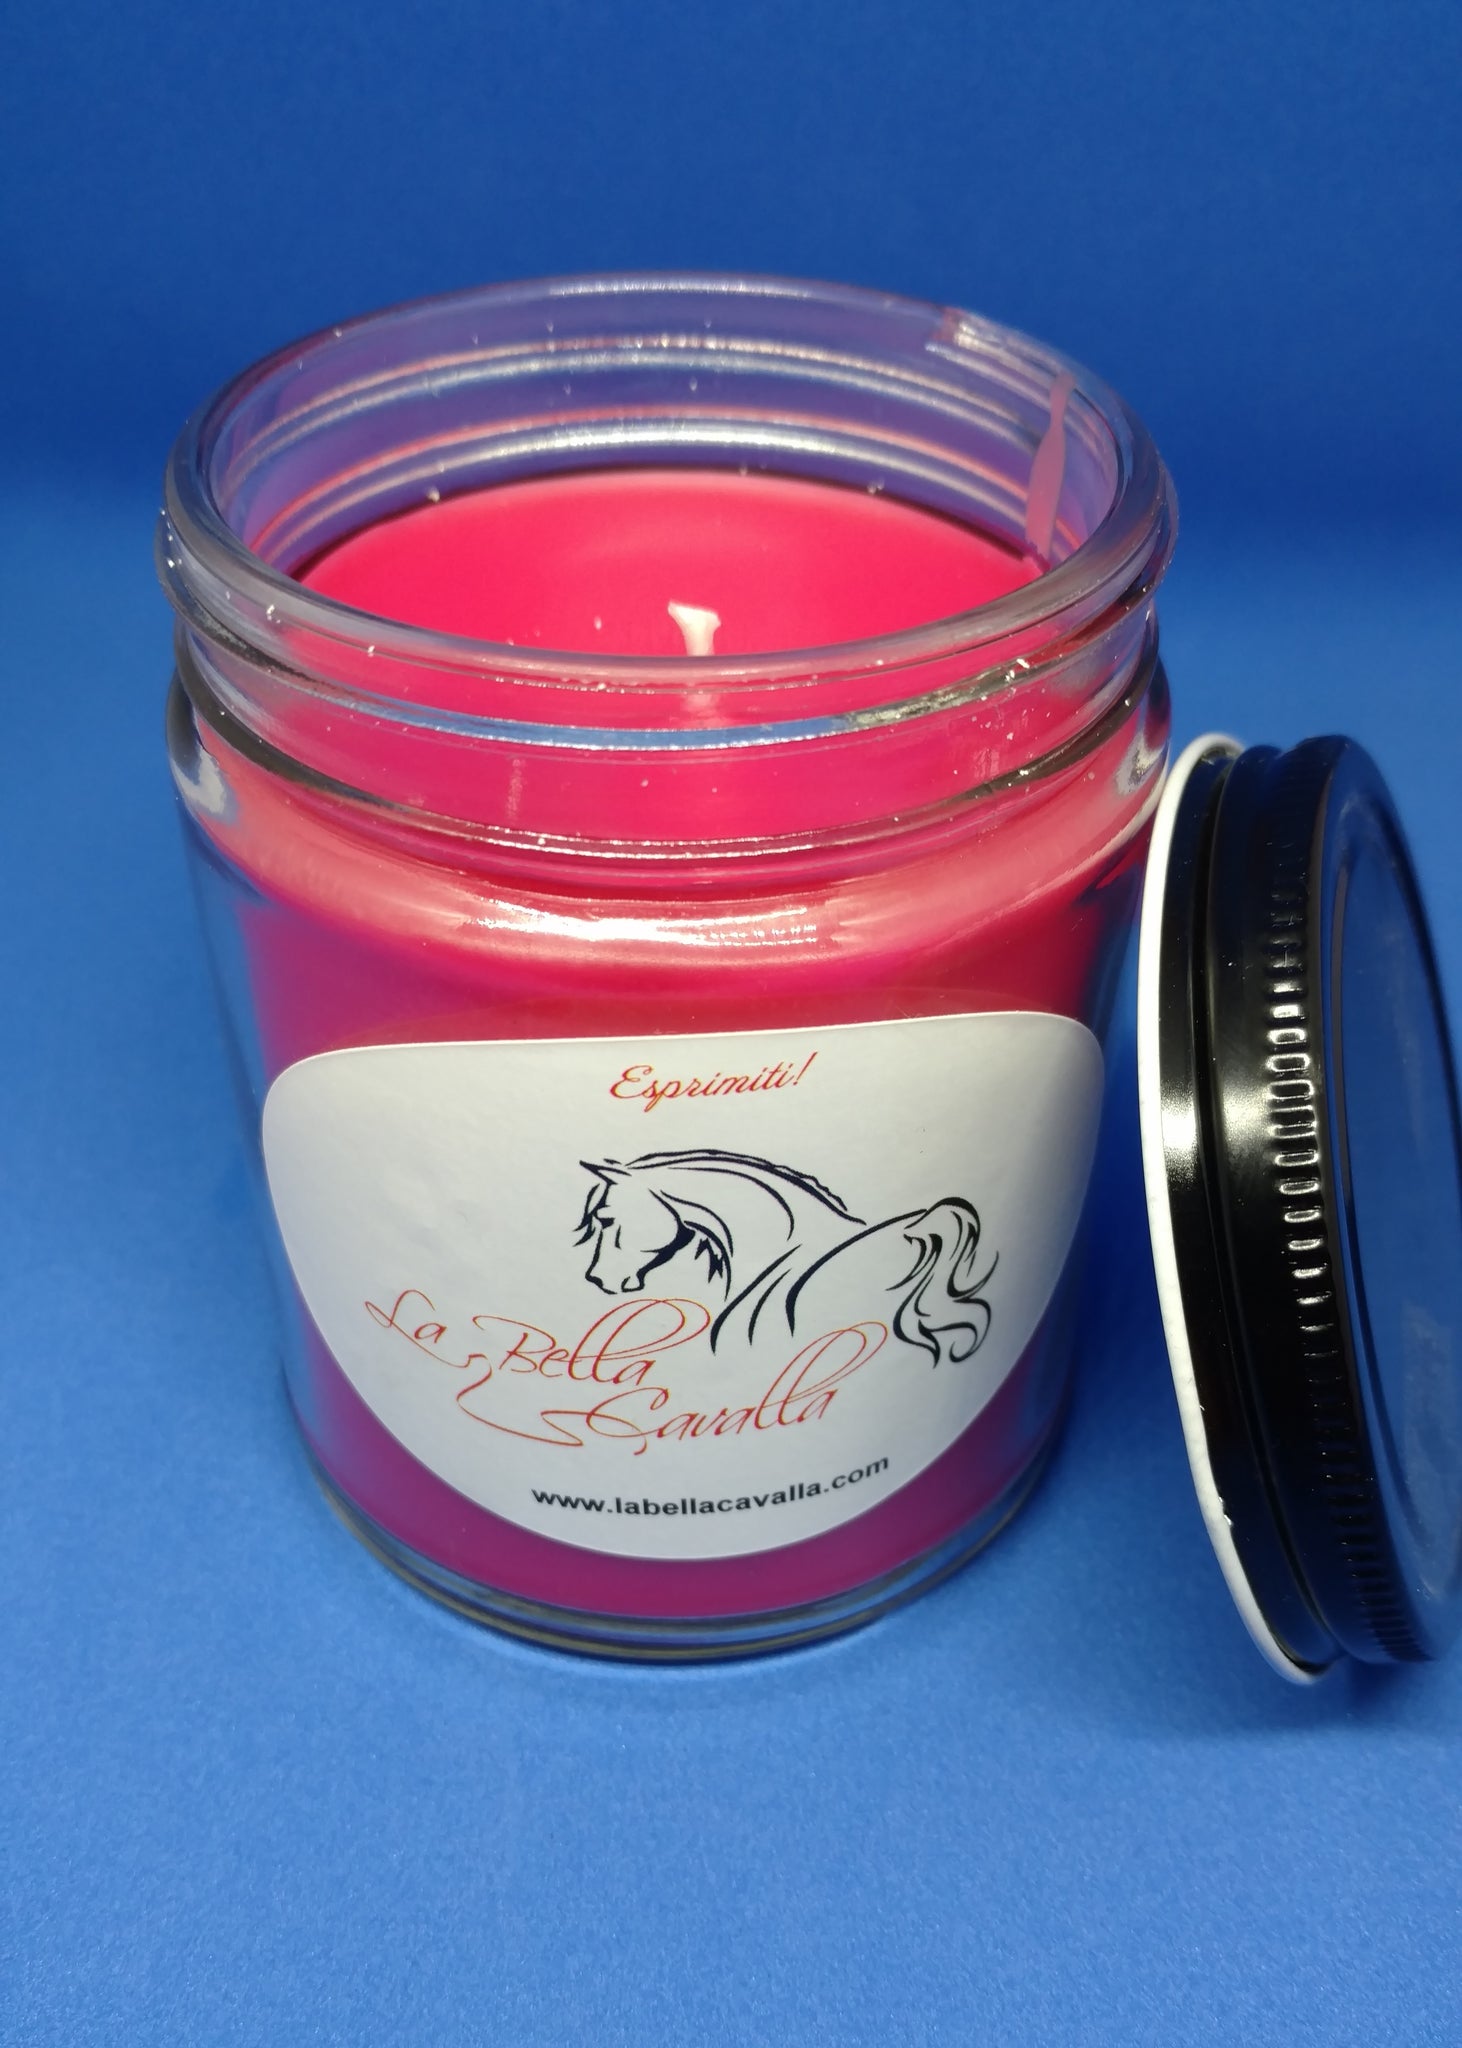 Bella's Favorite! Apple-scented Soy Candle